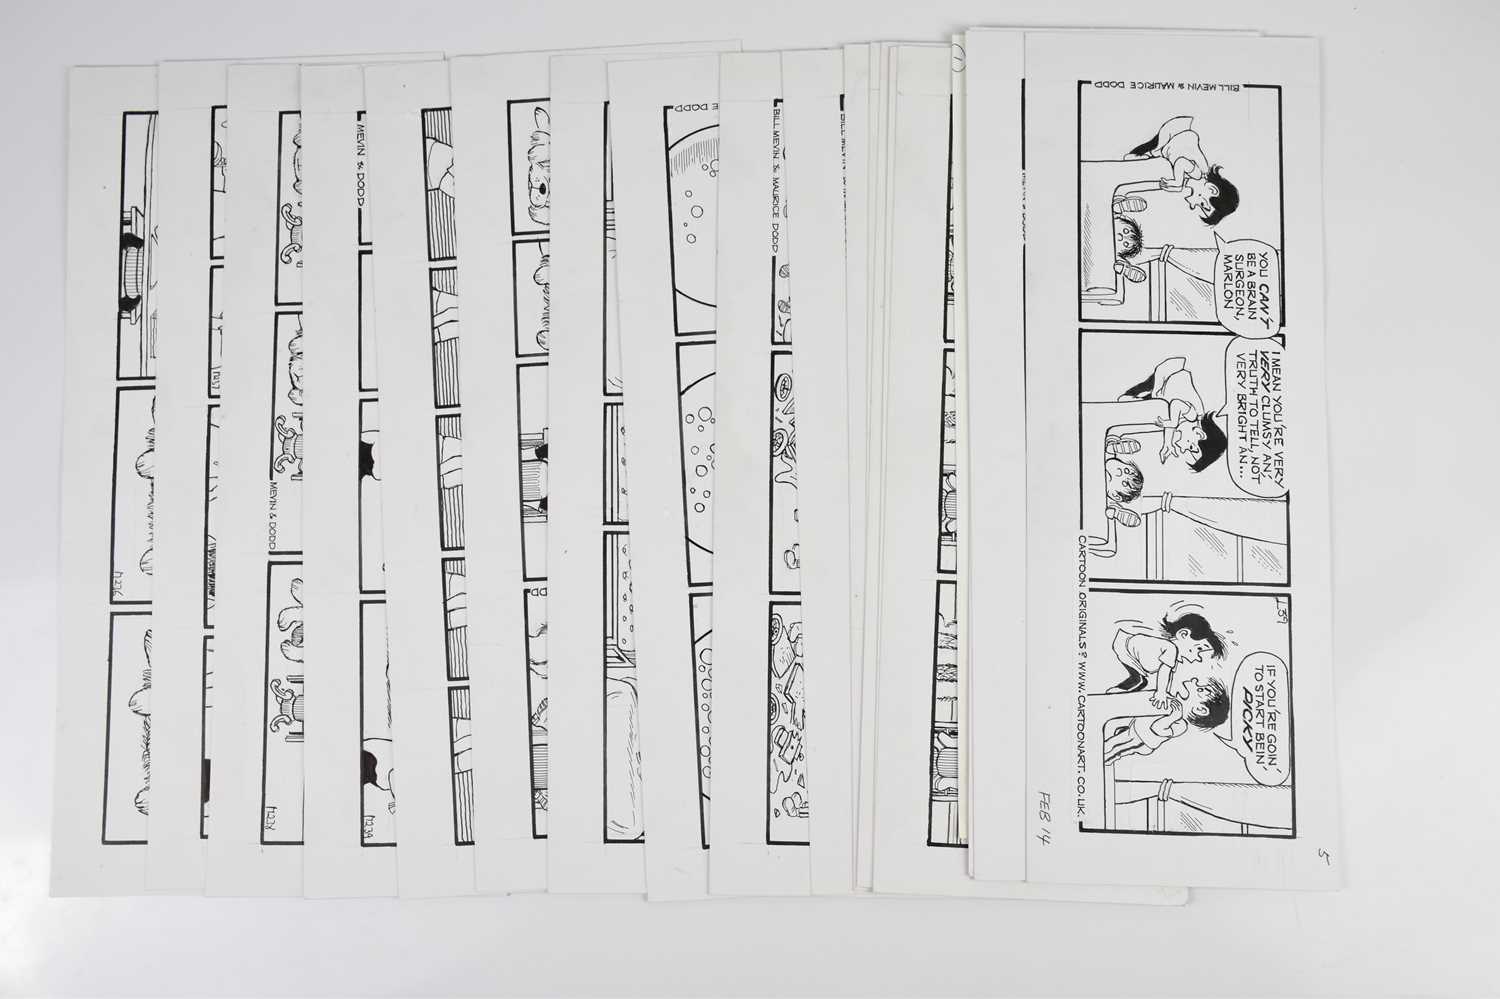 † BILL MEVIN (AND MAURICE DODD); twenty black and white original storyboard cartoons for The